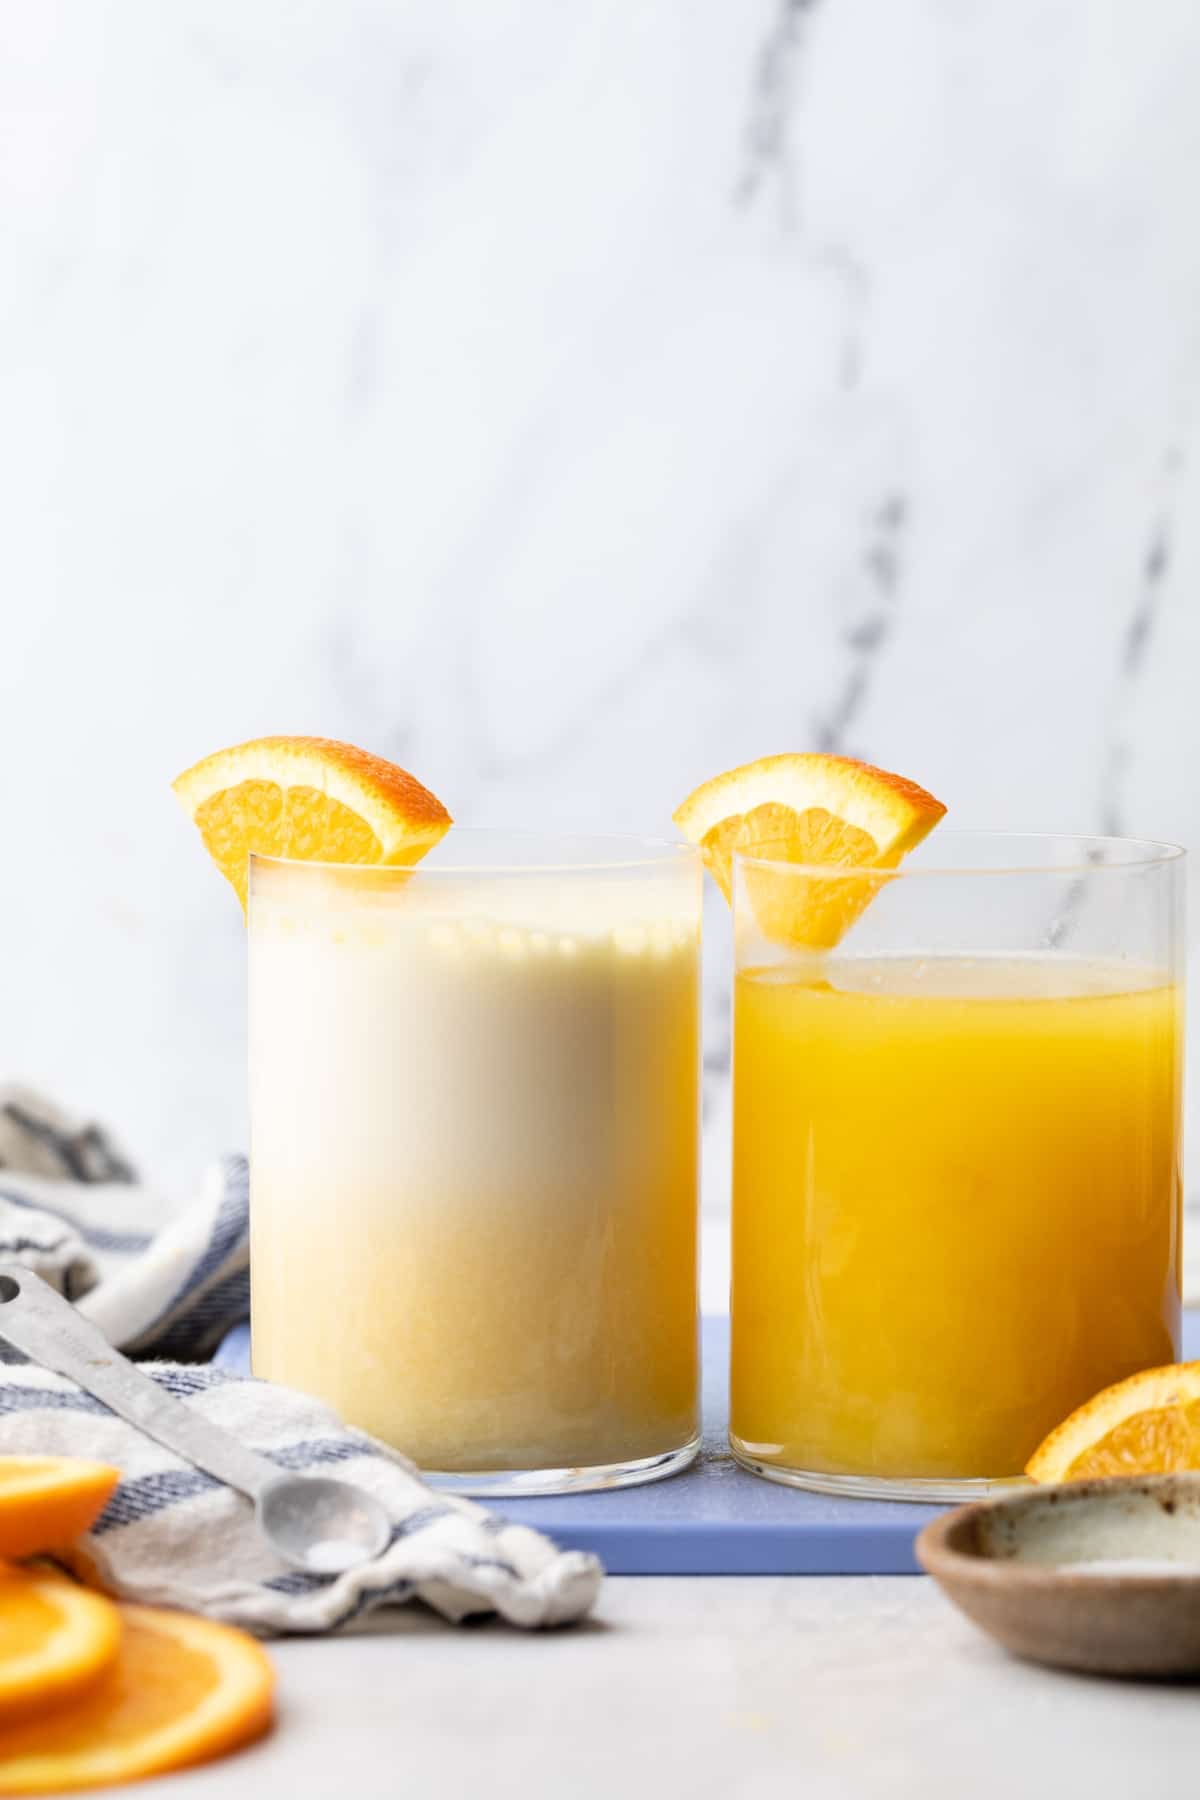 Two glasses with different adrenal cocktail drinks in them and orange slices.